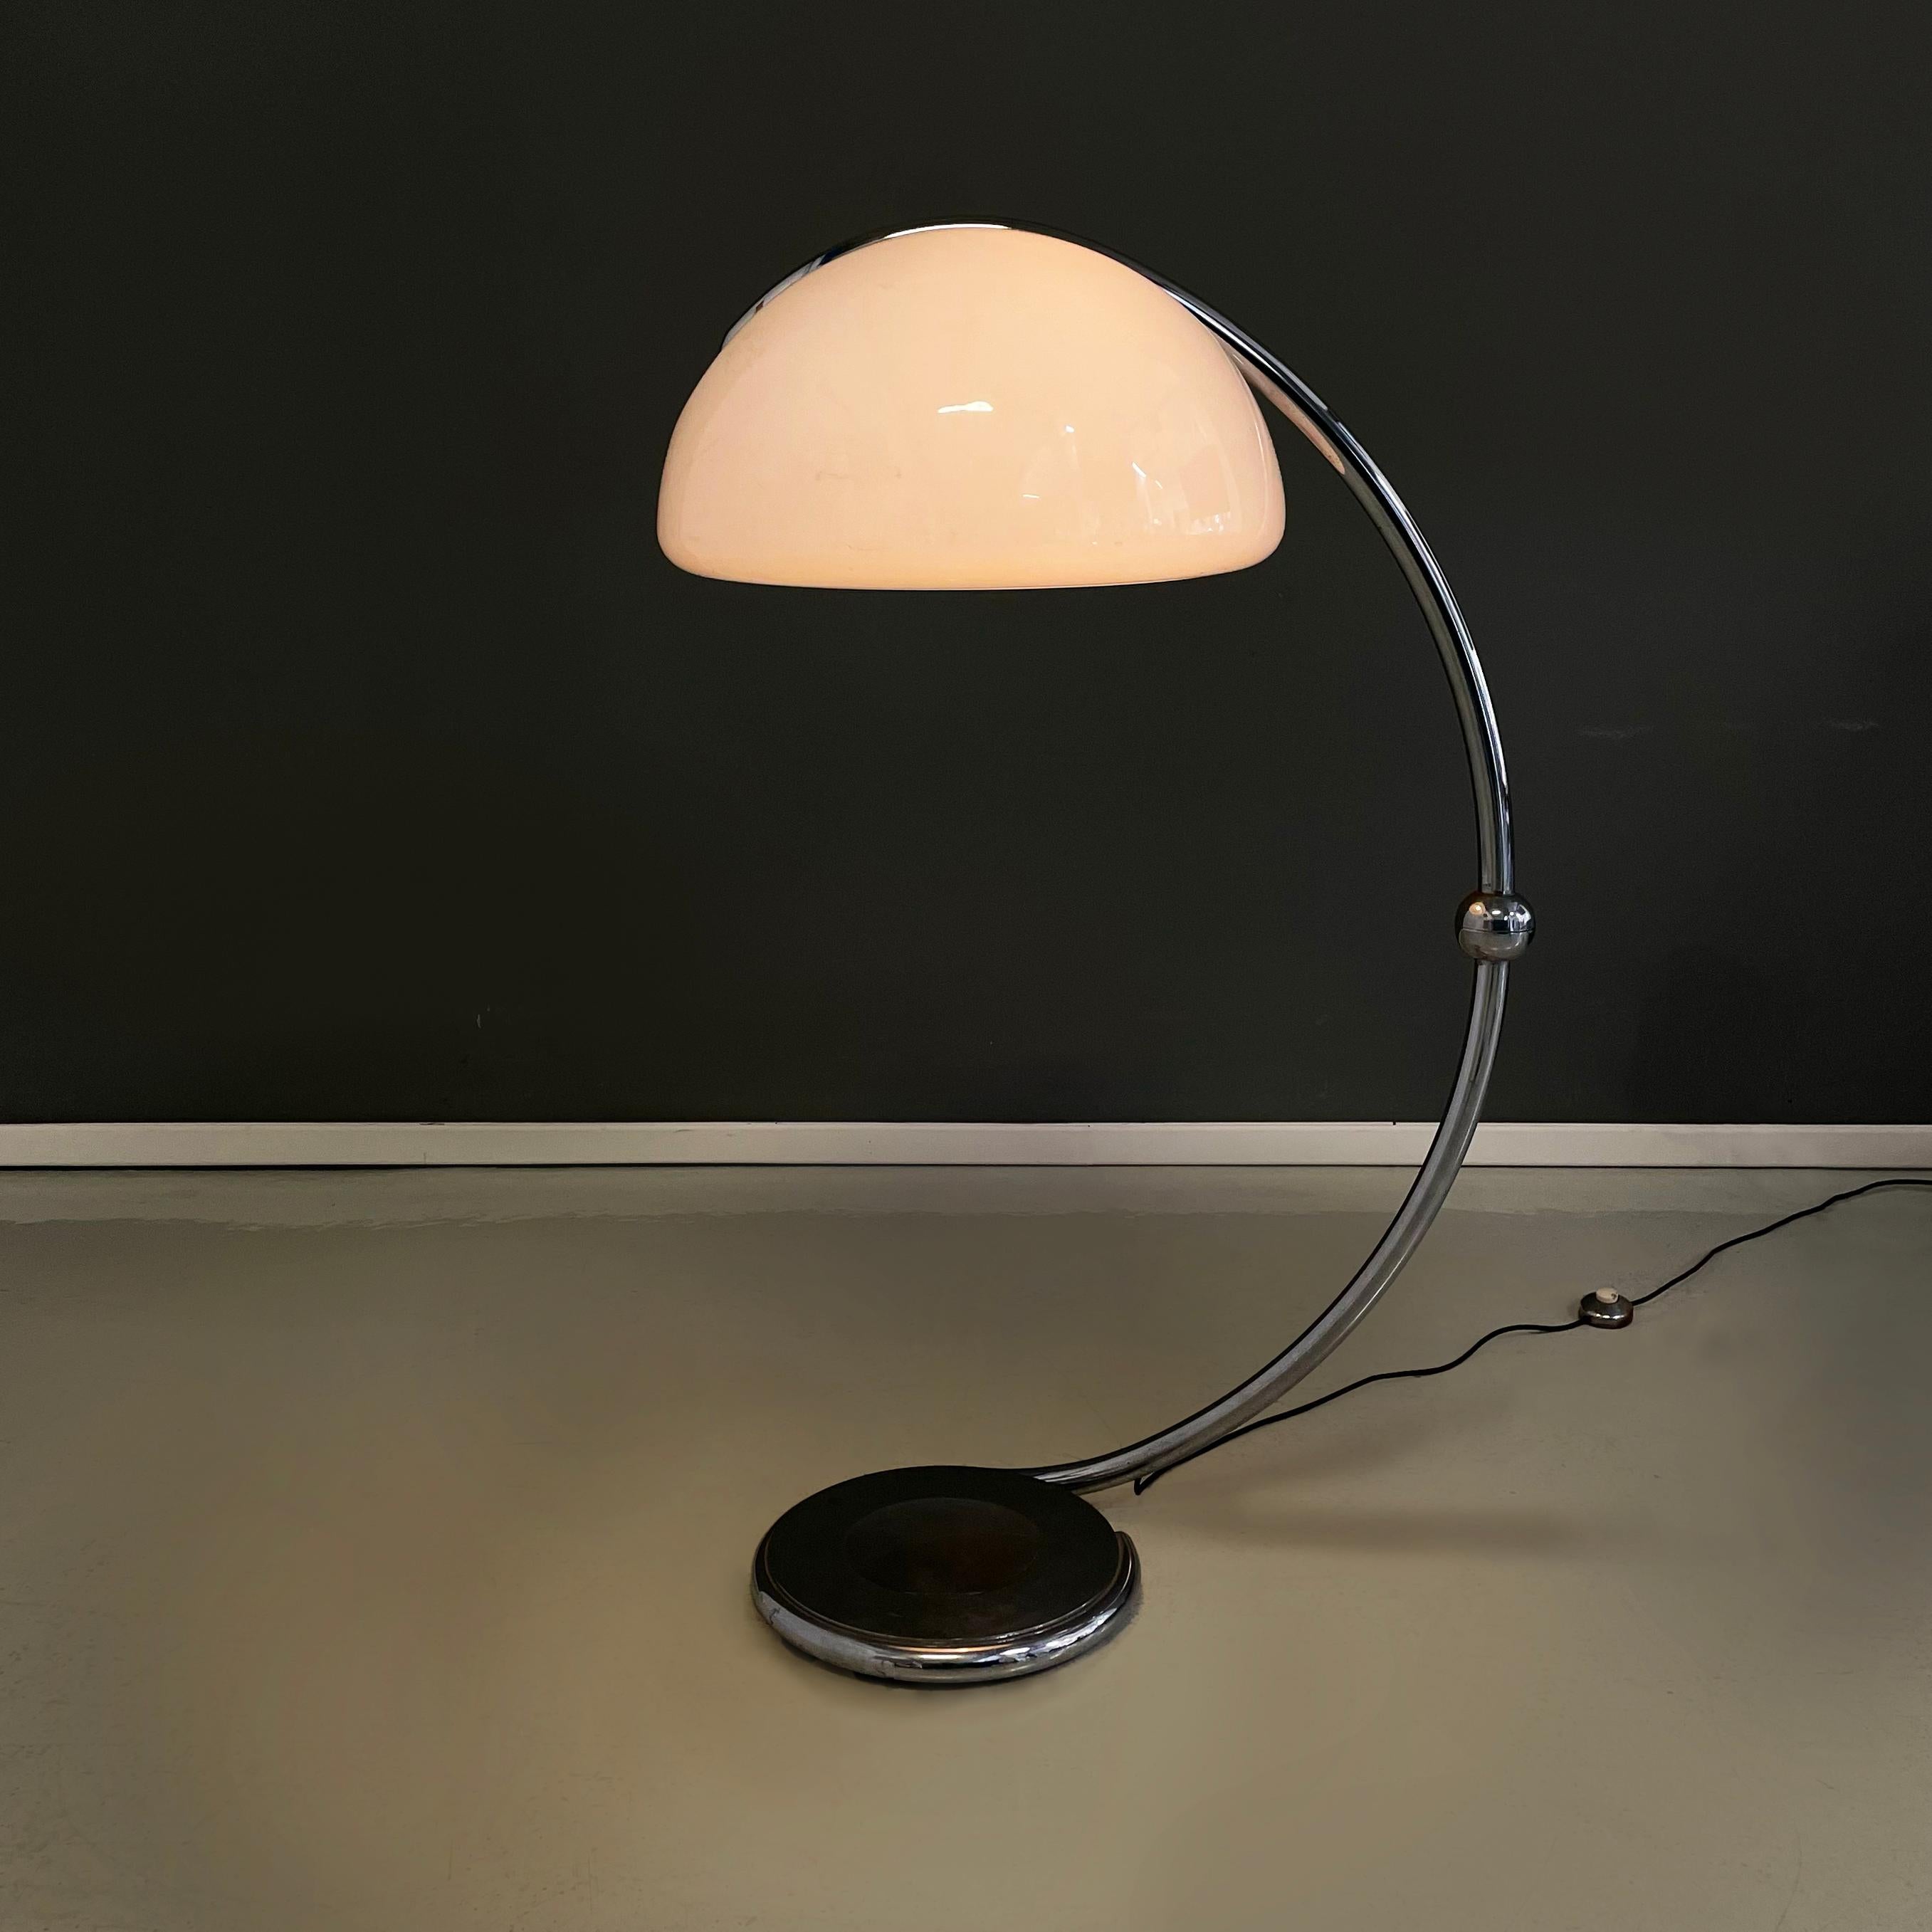 Italian space age Floor lamp Serpente by Elio Martinelli for Martinelli Luce, 1970s
Floor lamp mod. 2131 Serpente with adjustable metal tubular structure. The semi-spherical lampshade is in opaline plexiglass. The rounded structure has a pin in the